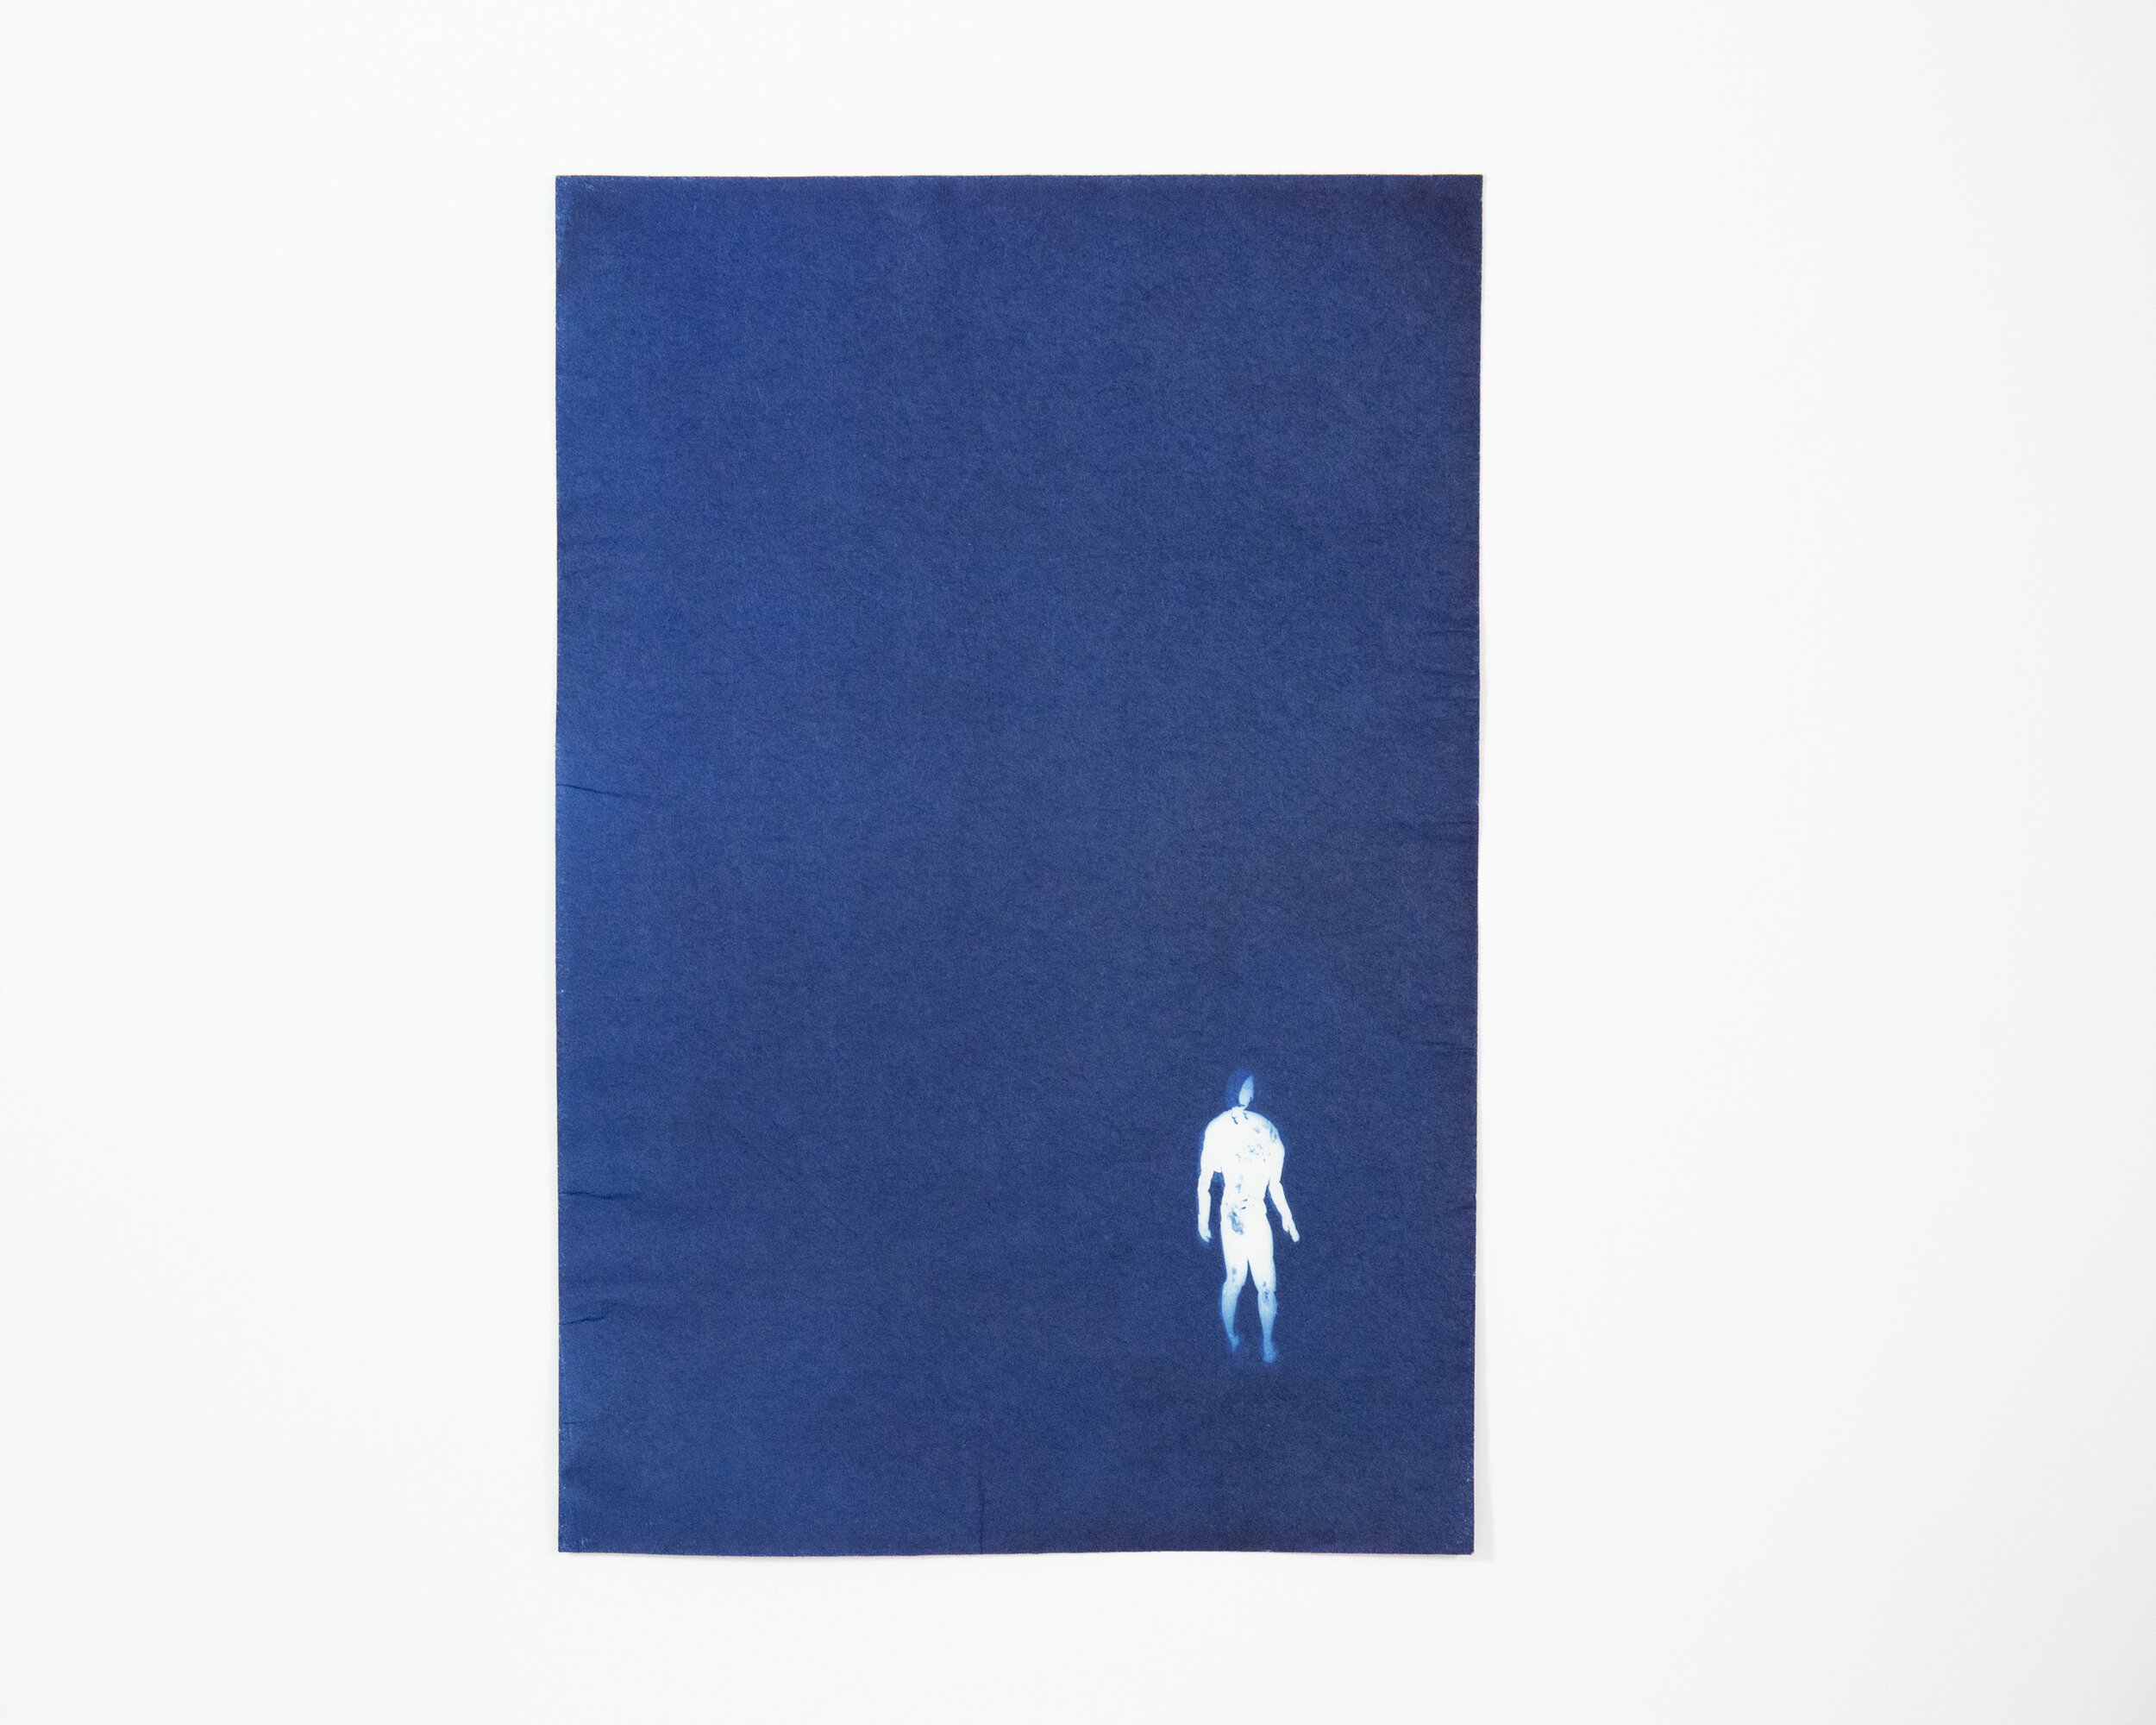  Han Qin,  Single Shadow 2 , 2018. Cyanotype on paper, 10 x 6 ½ inches ©Han Qin, courtesy Fou Gallery 